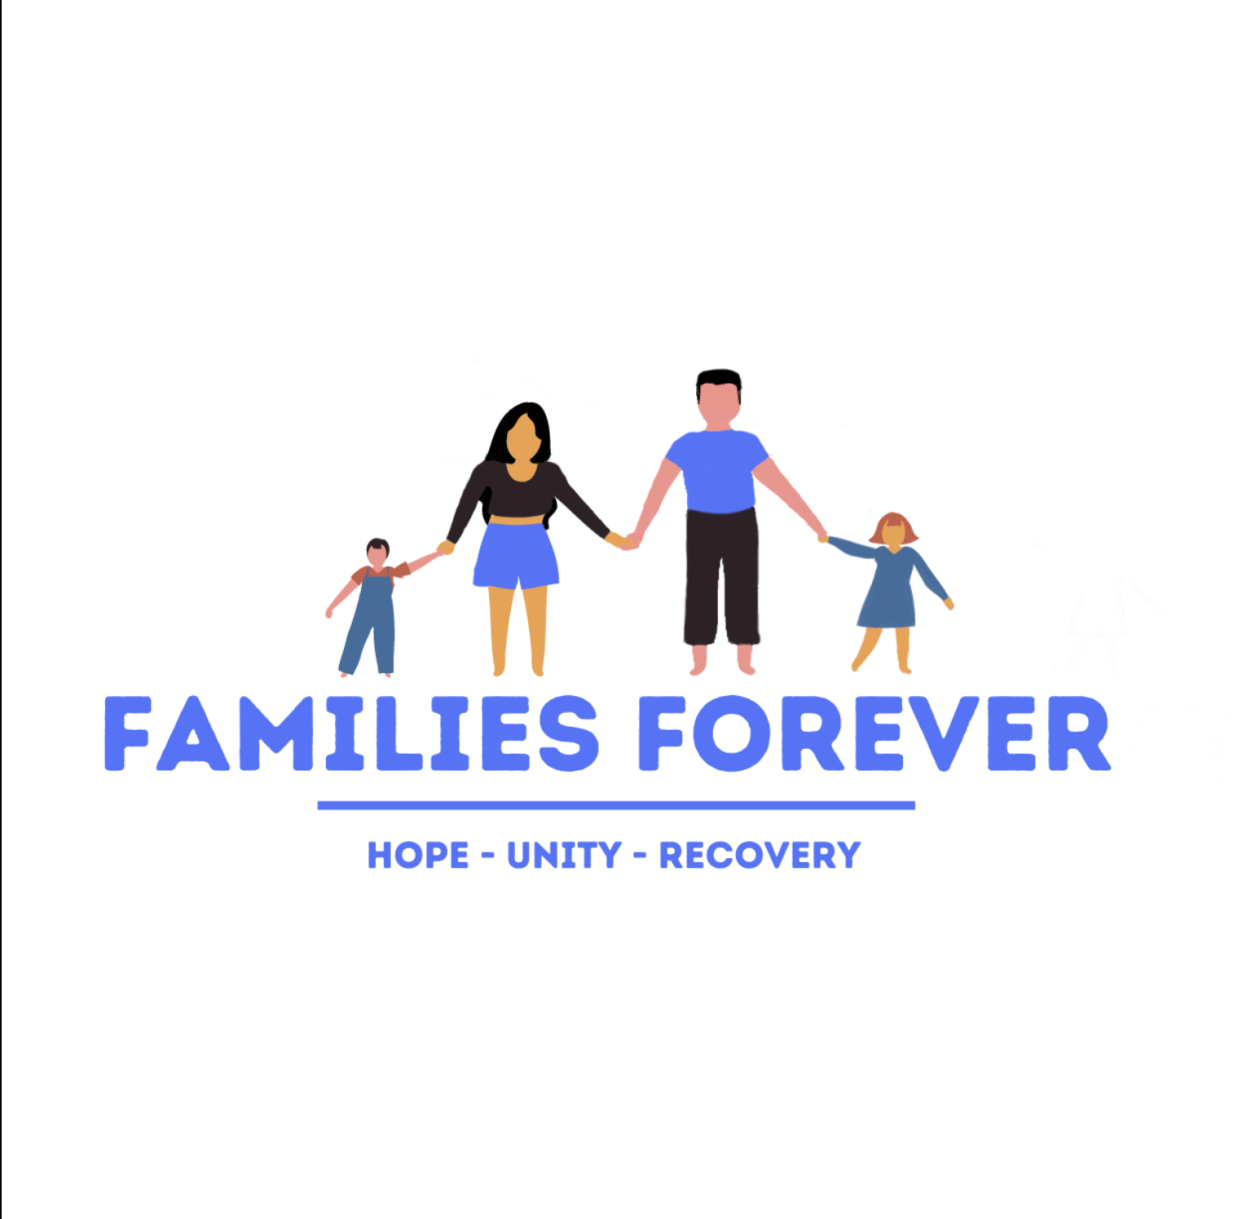 Families Forever provide recovery services in Bedford and Lawrence County. The nonprofit specializes in the areas of substance use disorder and mental health. It is located at 1129 16th street in Bedford.